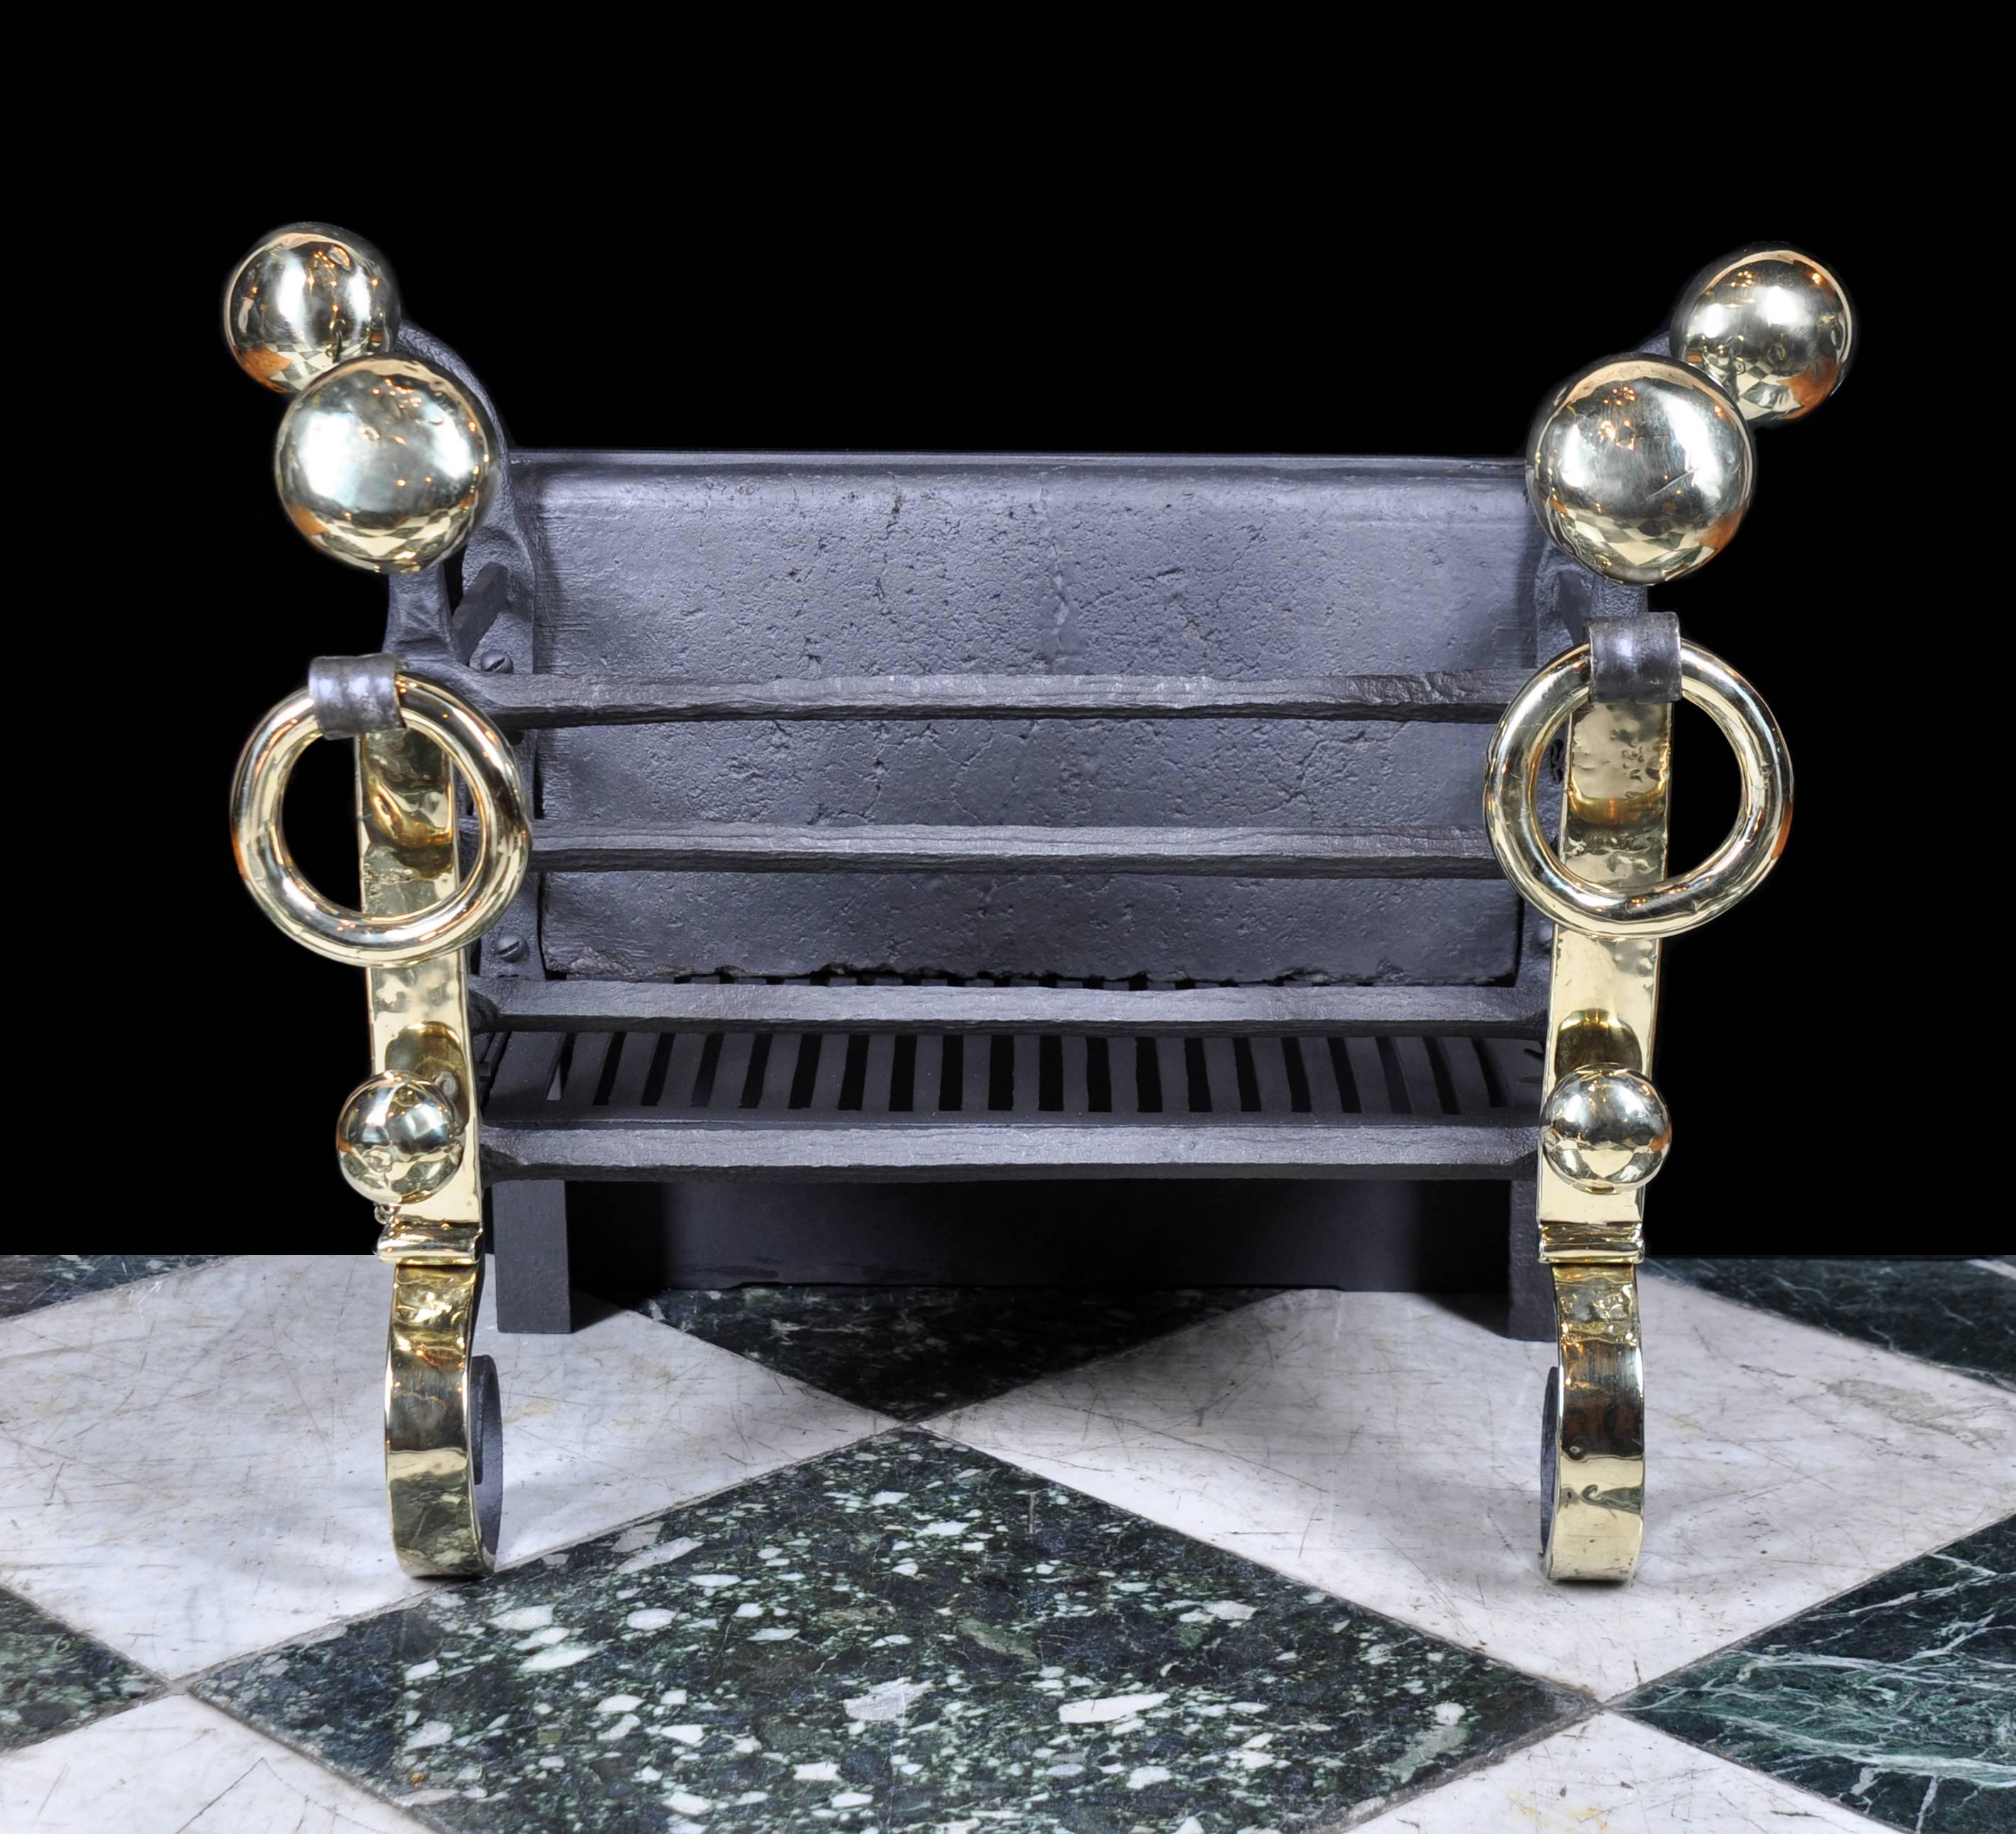 A late 19th century Arts & Crafts fire grate in wrought iron with large brass disc finials behind brass rings above scrolled feet. 

English, circa 1890.
 